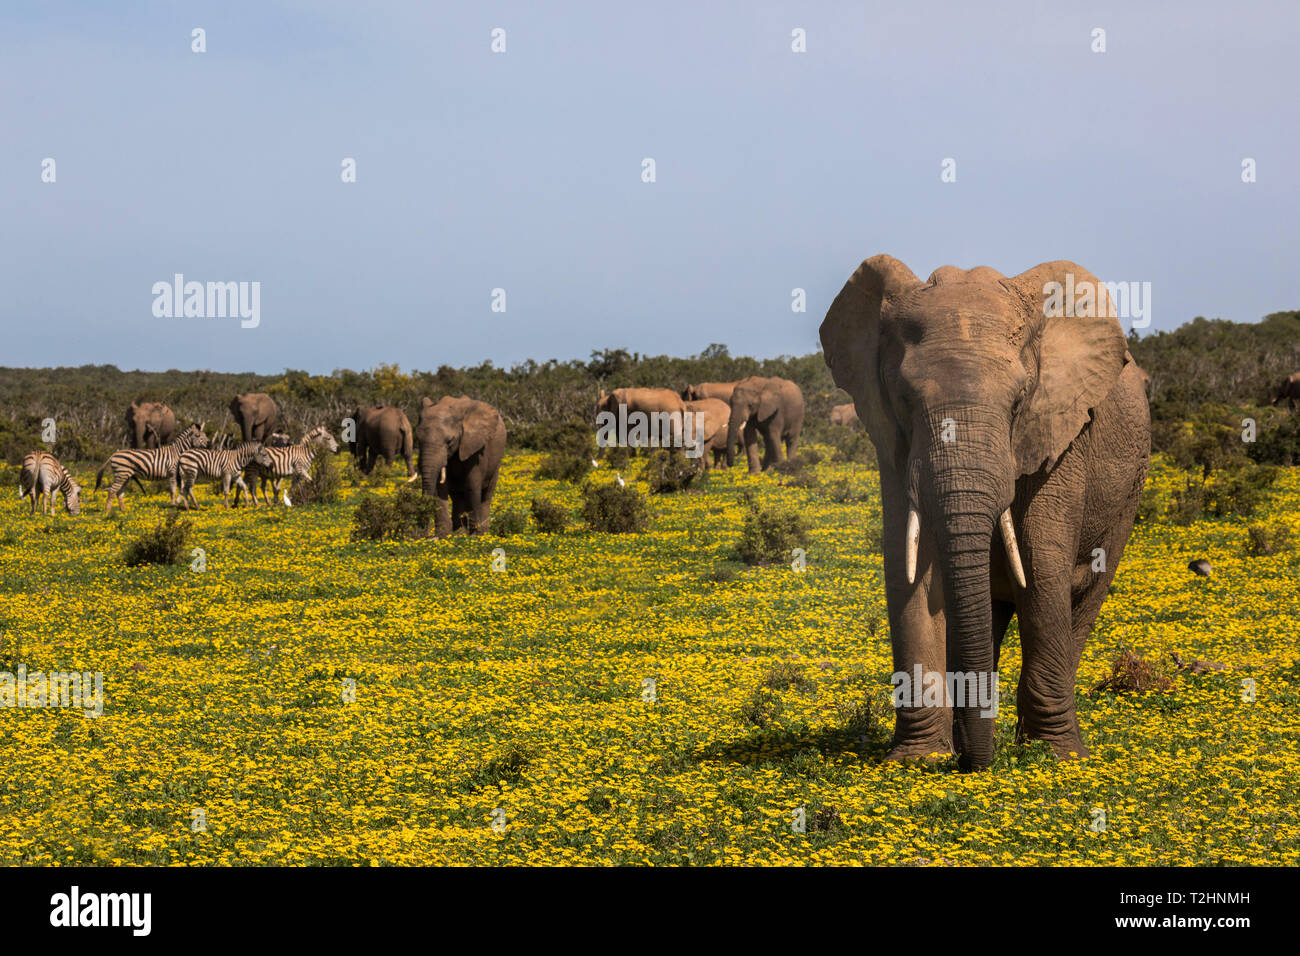 African elephants, Loxodonta africana, in spring flowers, Addo elephant national park, Eastern Cape, South Africa Stock Photo